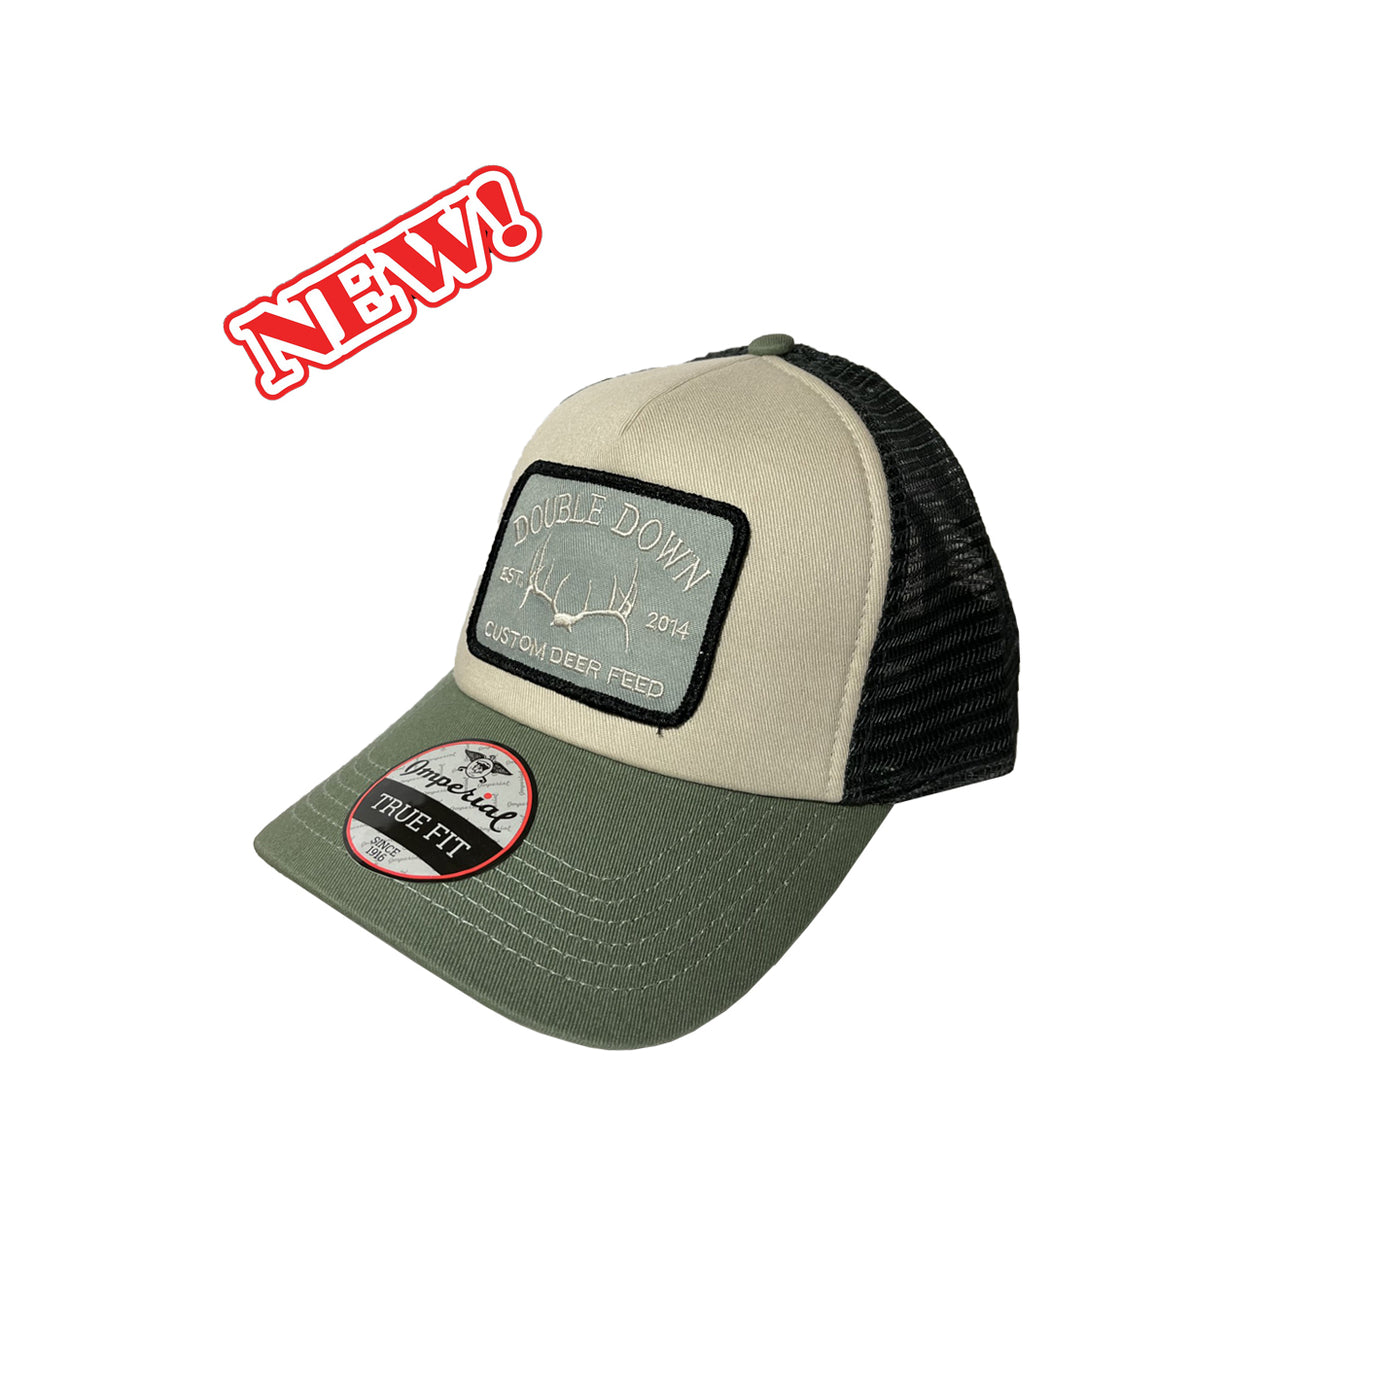 Skull Cap Patch Hat- Stone/Moss/Charcoal